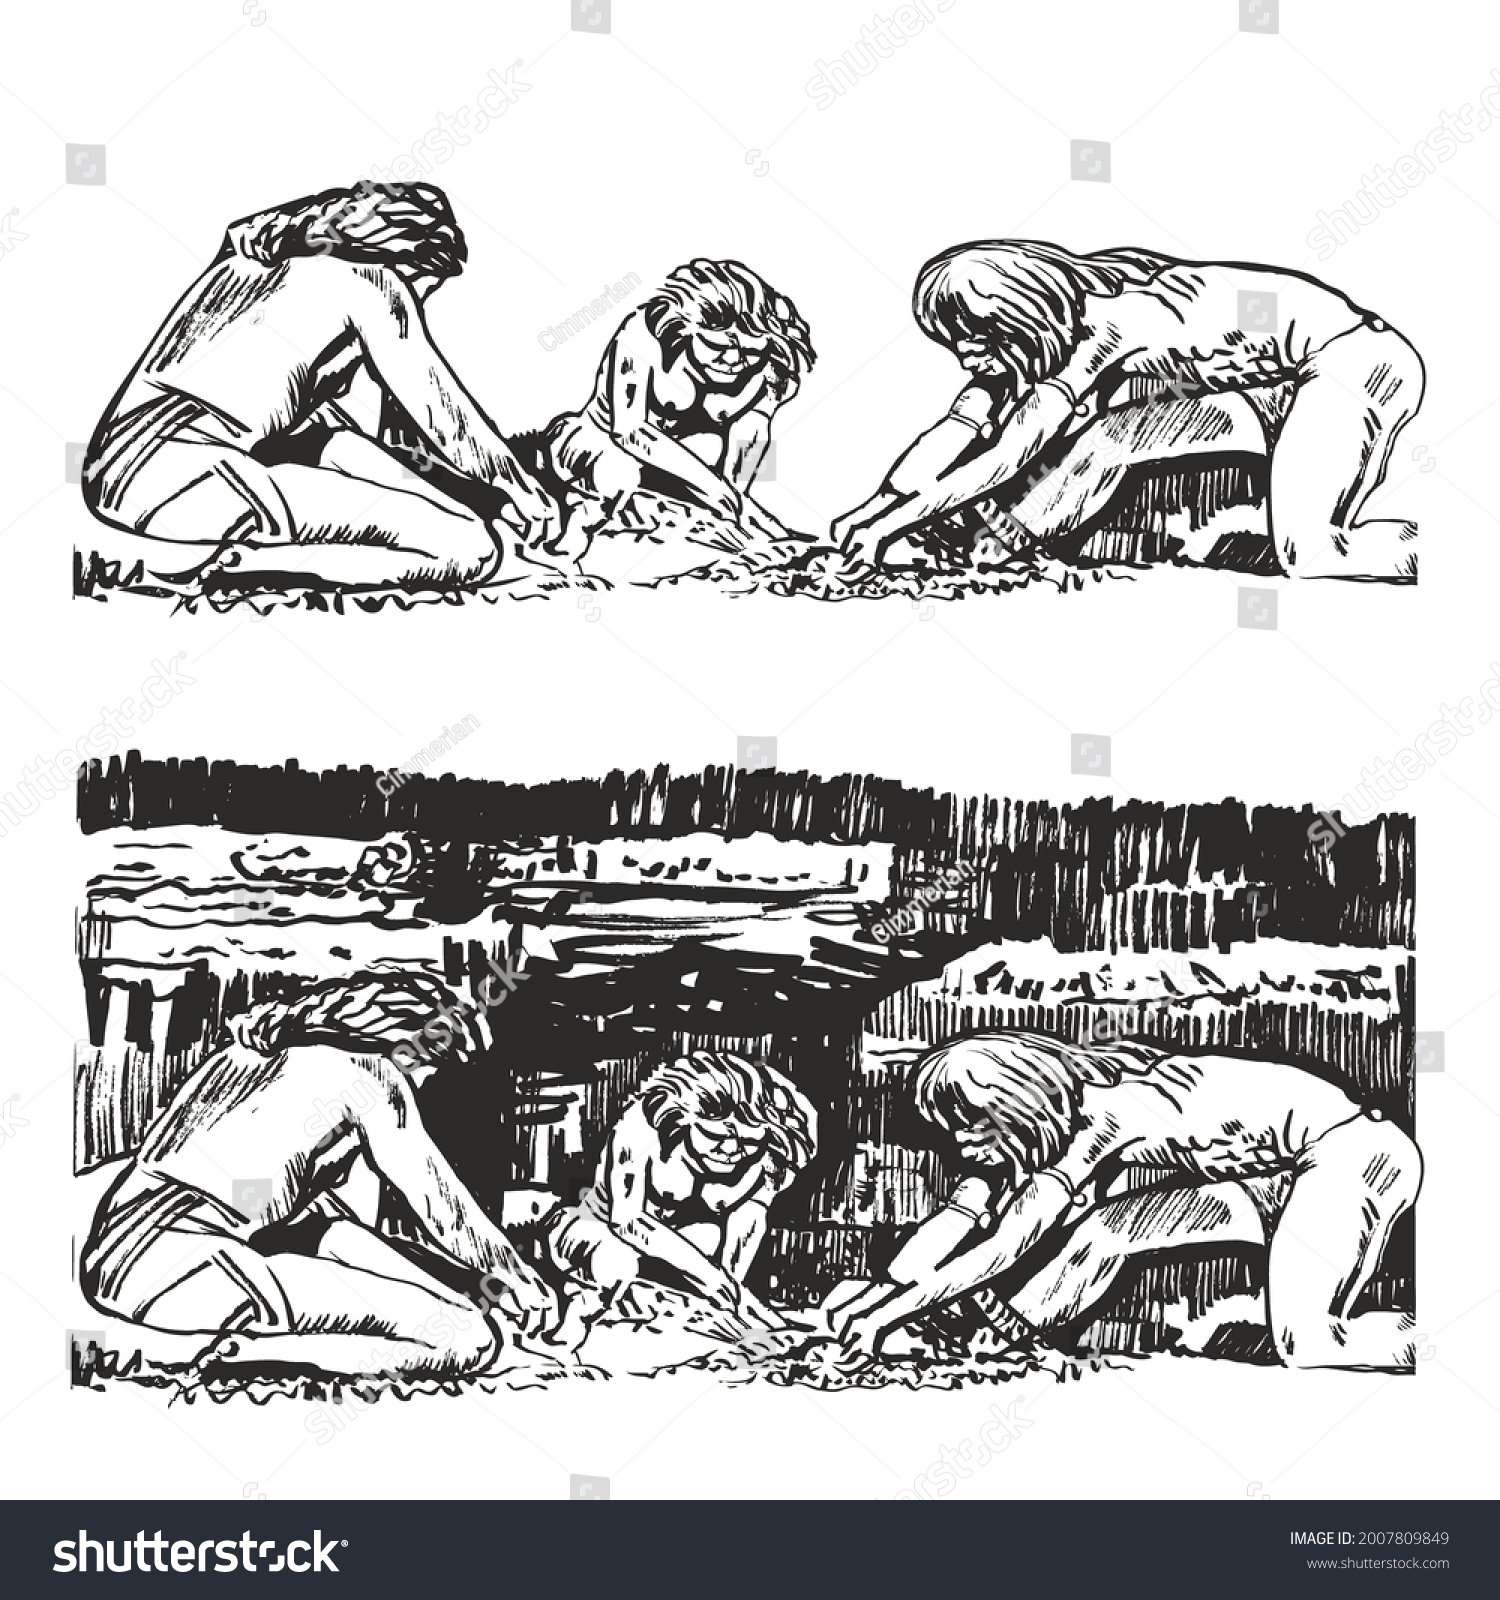 SVG of Cro-Magnon (Homo sapiens) man in a cave mined fire. Hand drawn illustration. svg